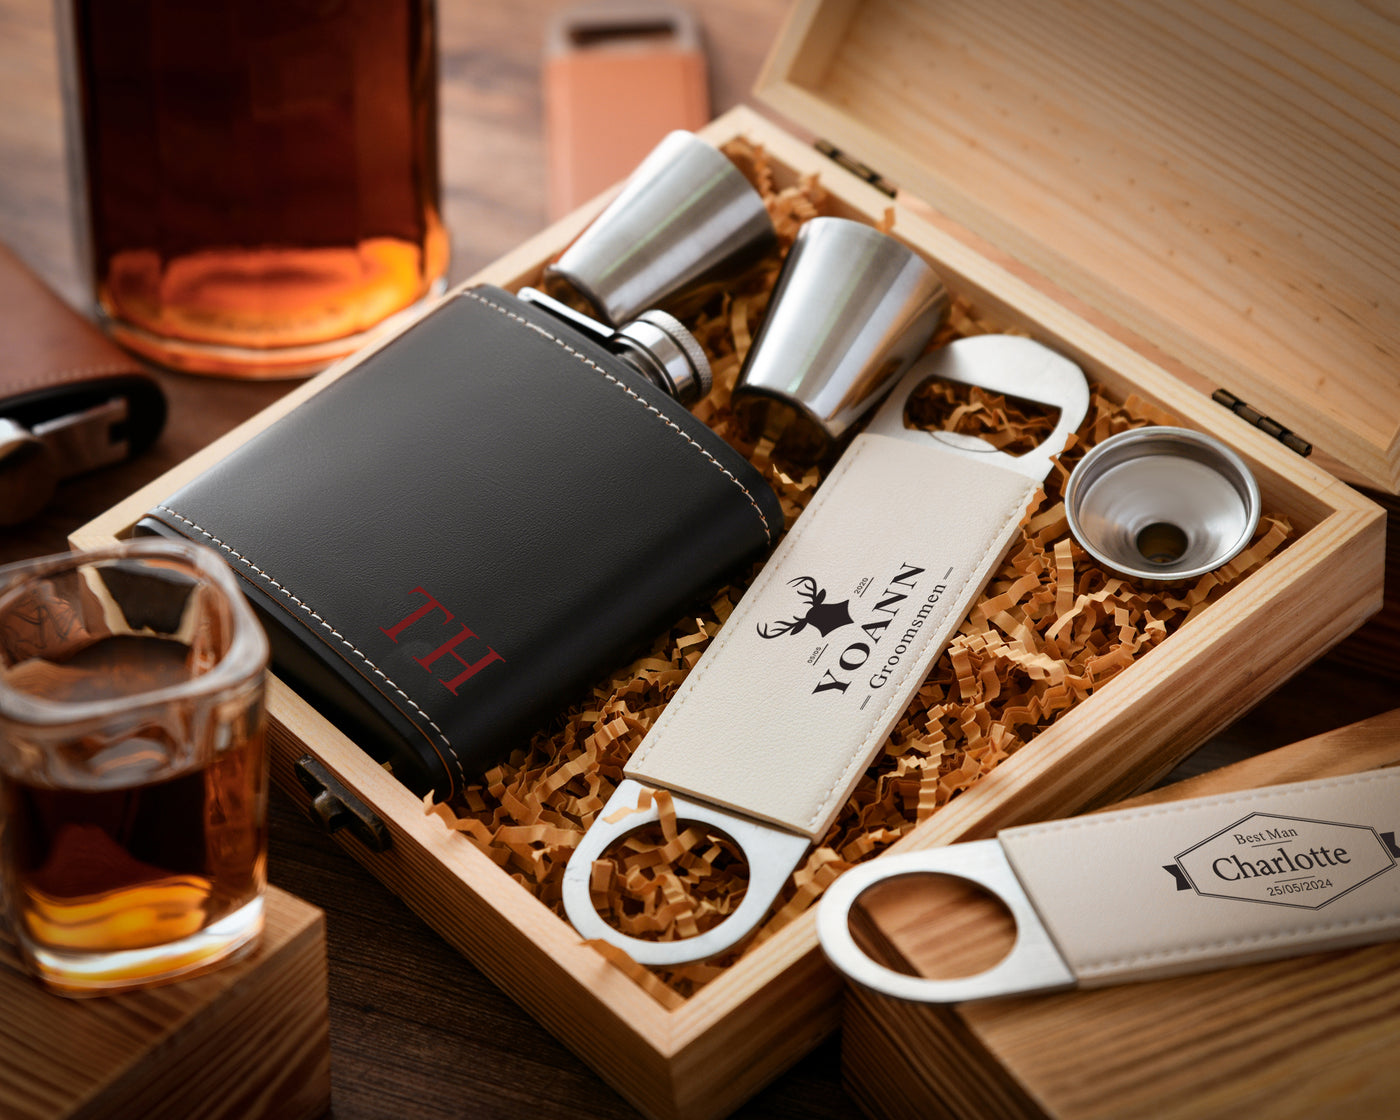 Engraved Groomsman Proposal Flask Set, Bachelor Party Gift, Personalized Flask, Best Man Gift Flask Set